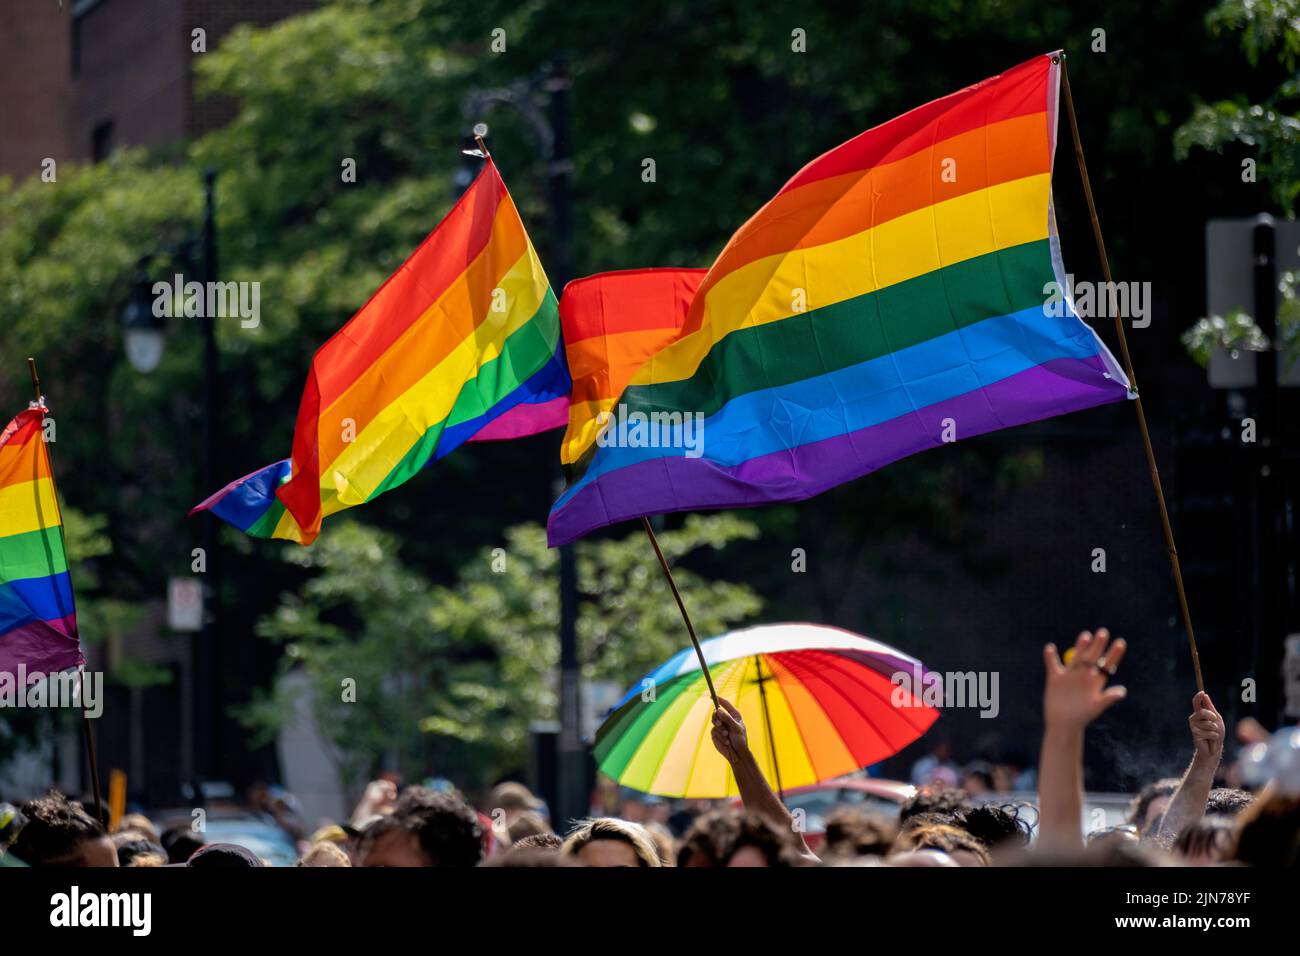 Montreal, CA - 7 August 2022: Gay rainbow flags waving above blurred crowd Stock Photo